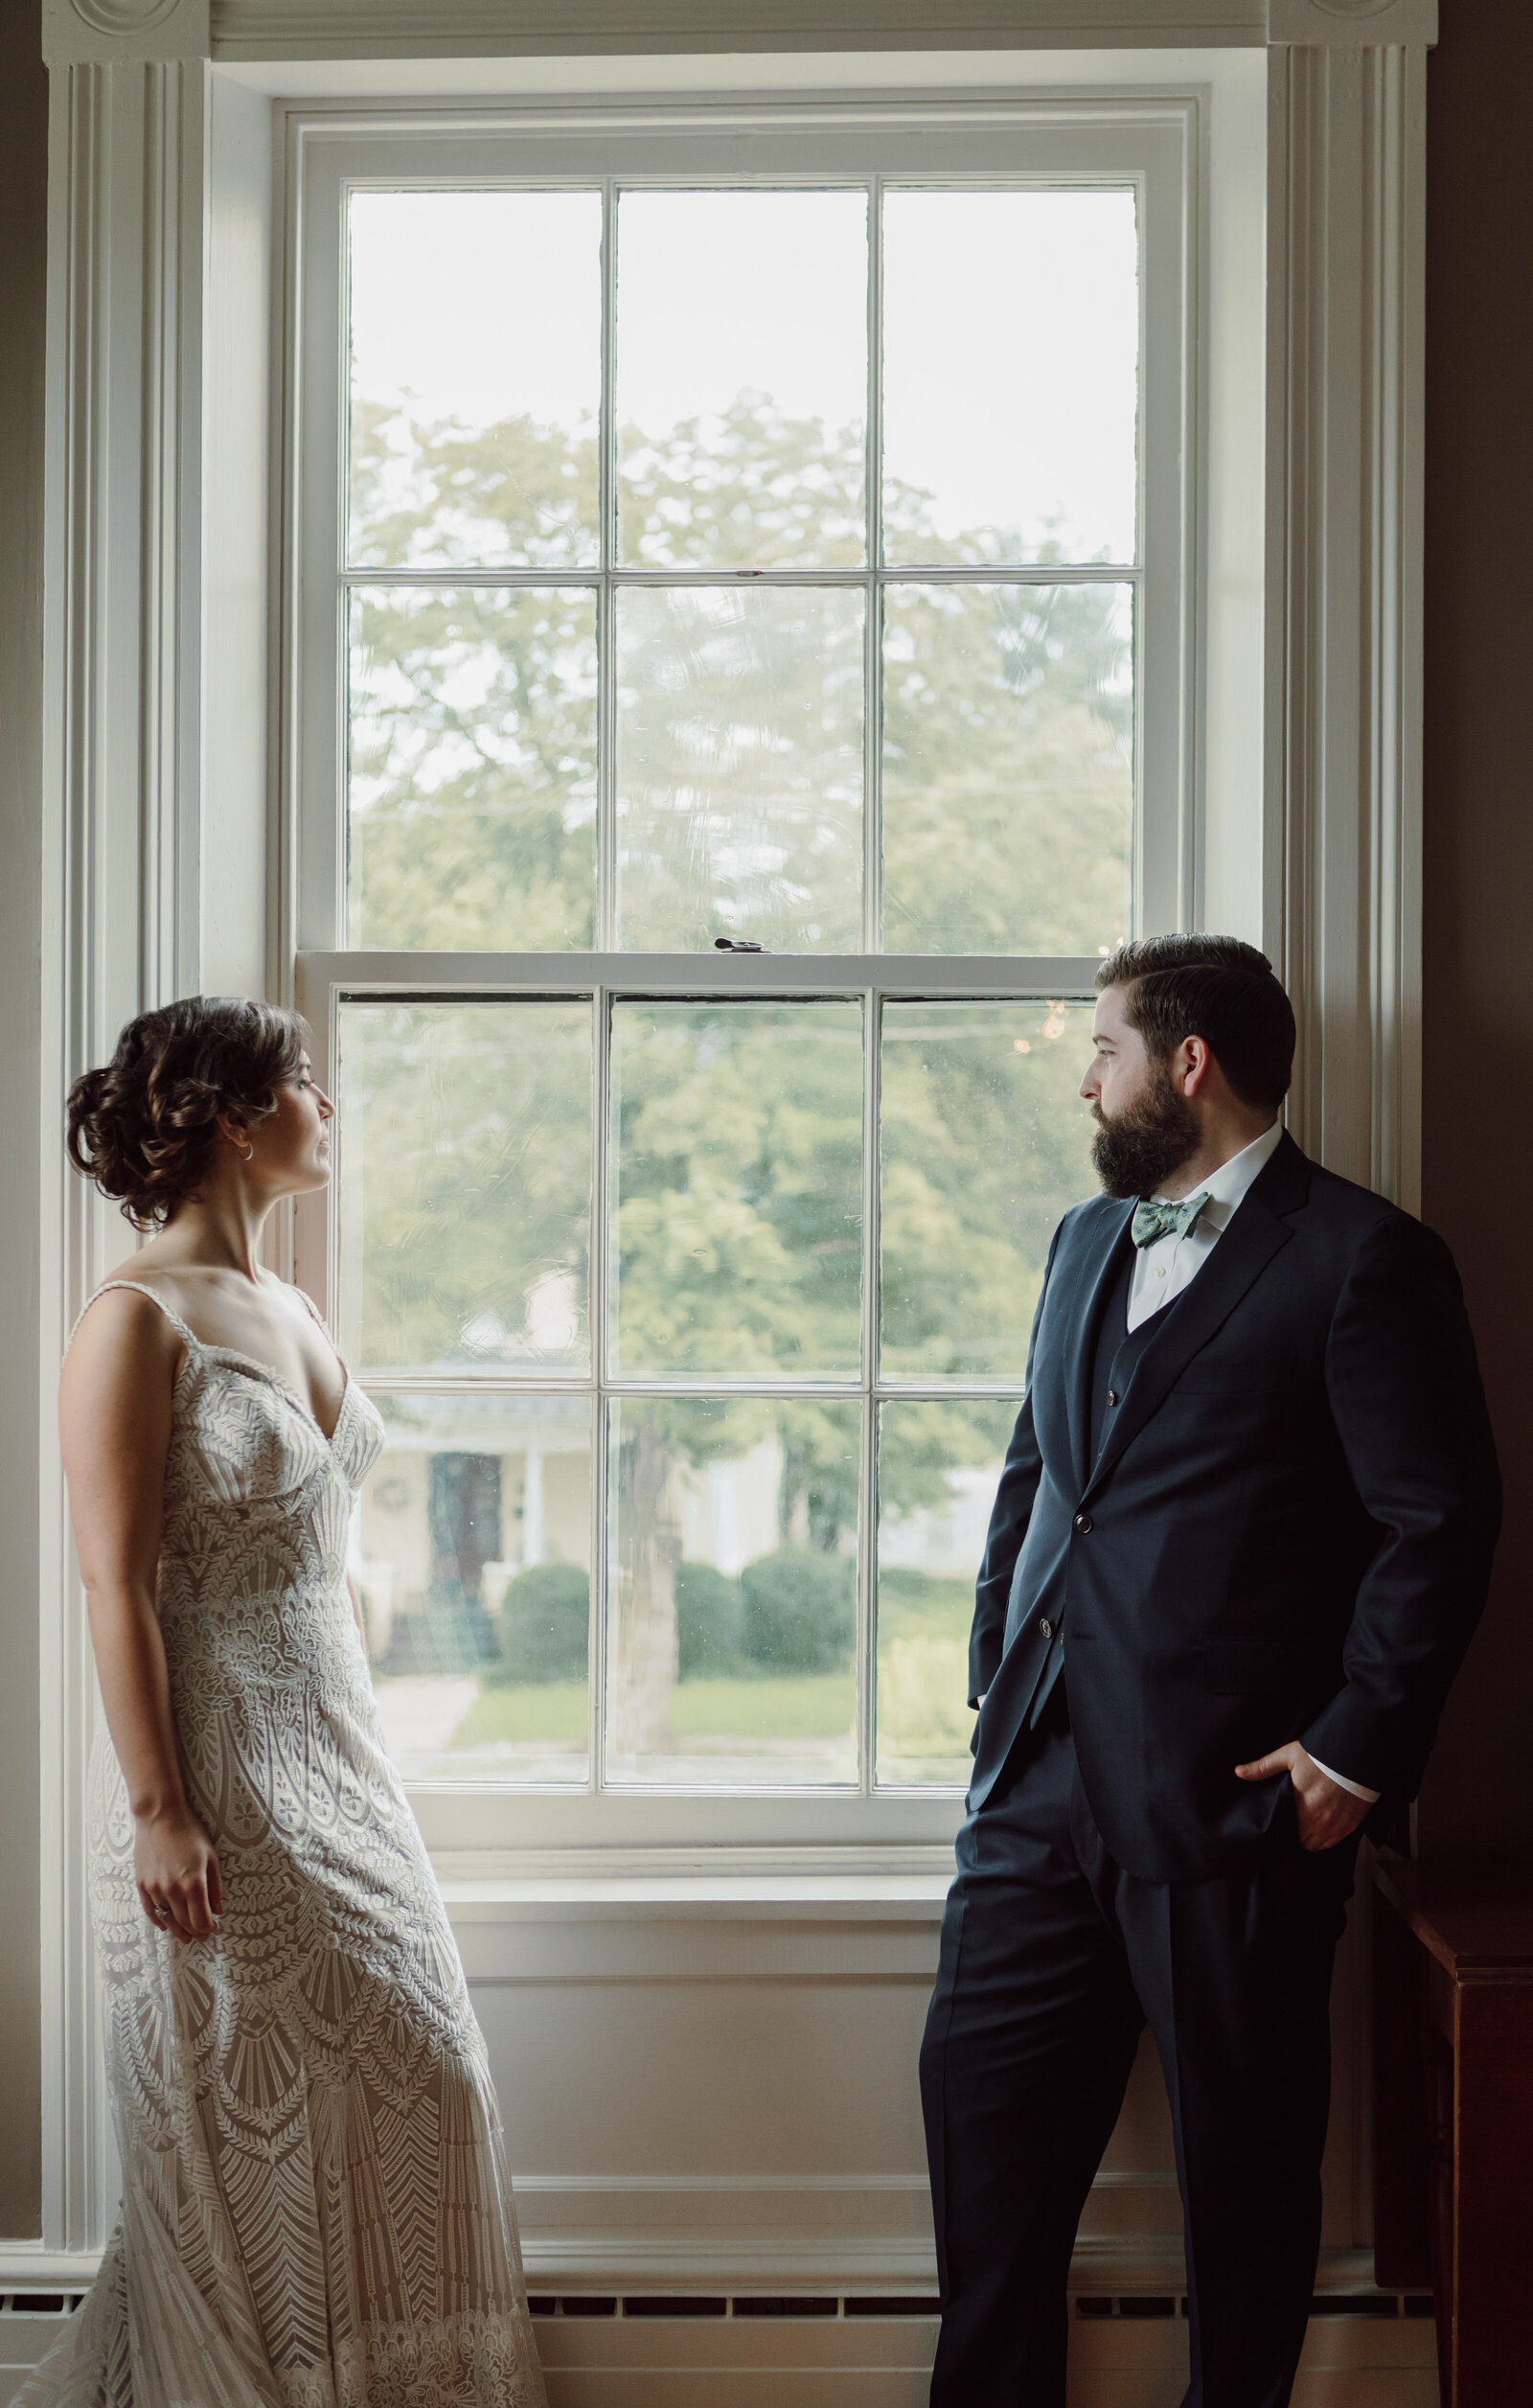 A bride and groom stand together looking out a window